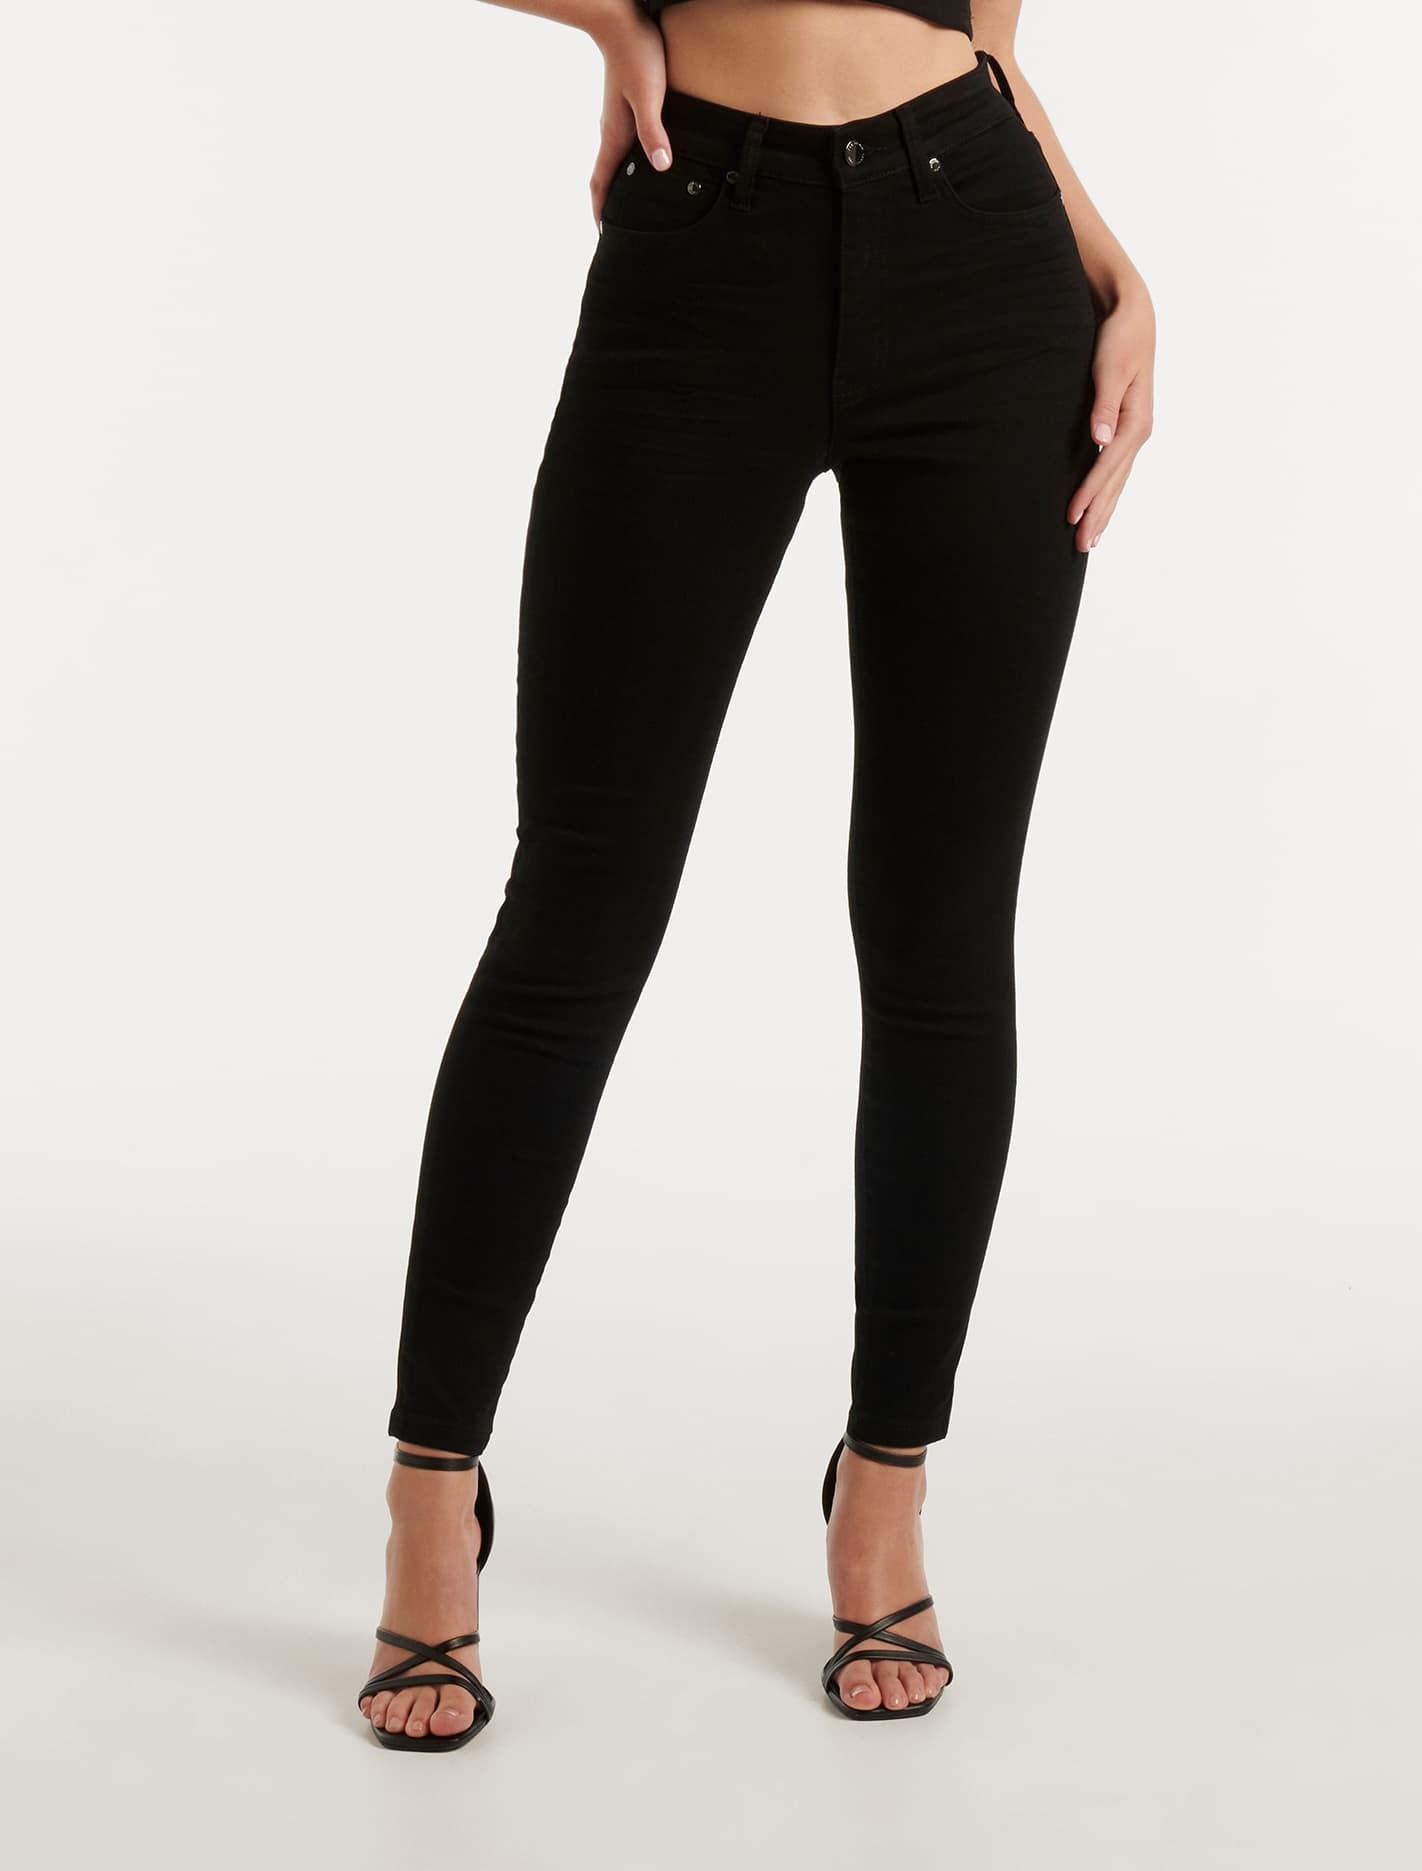 Nala Mid-Rise Skinny Jeans Victoria Bay | Forever New